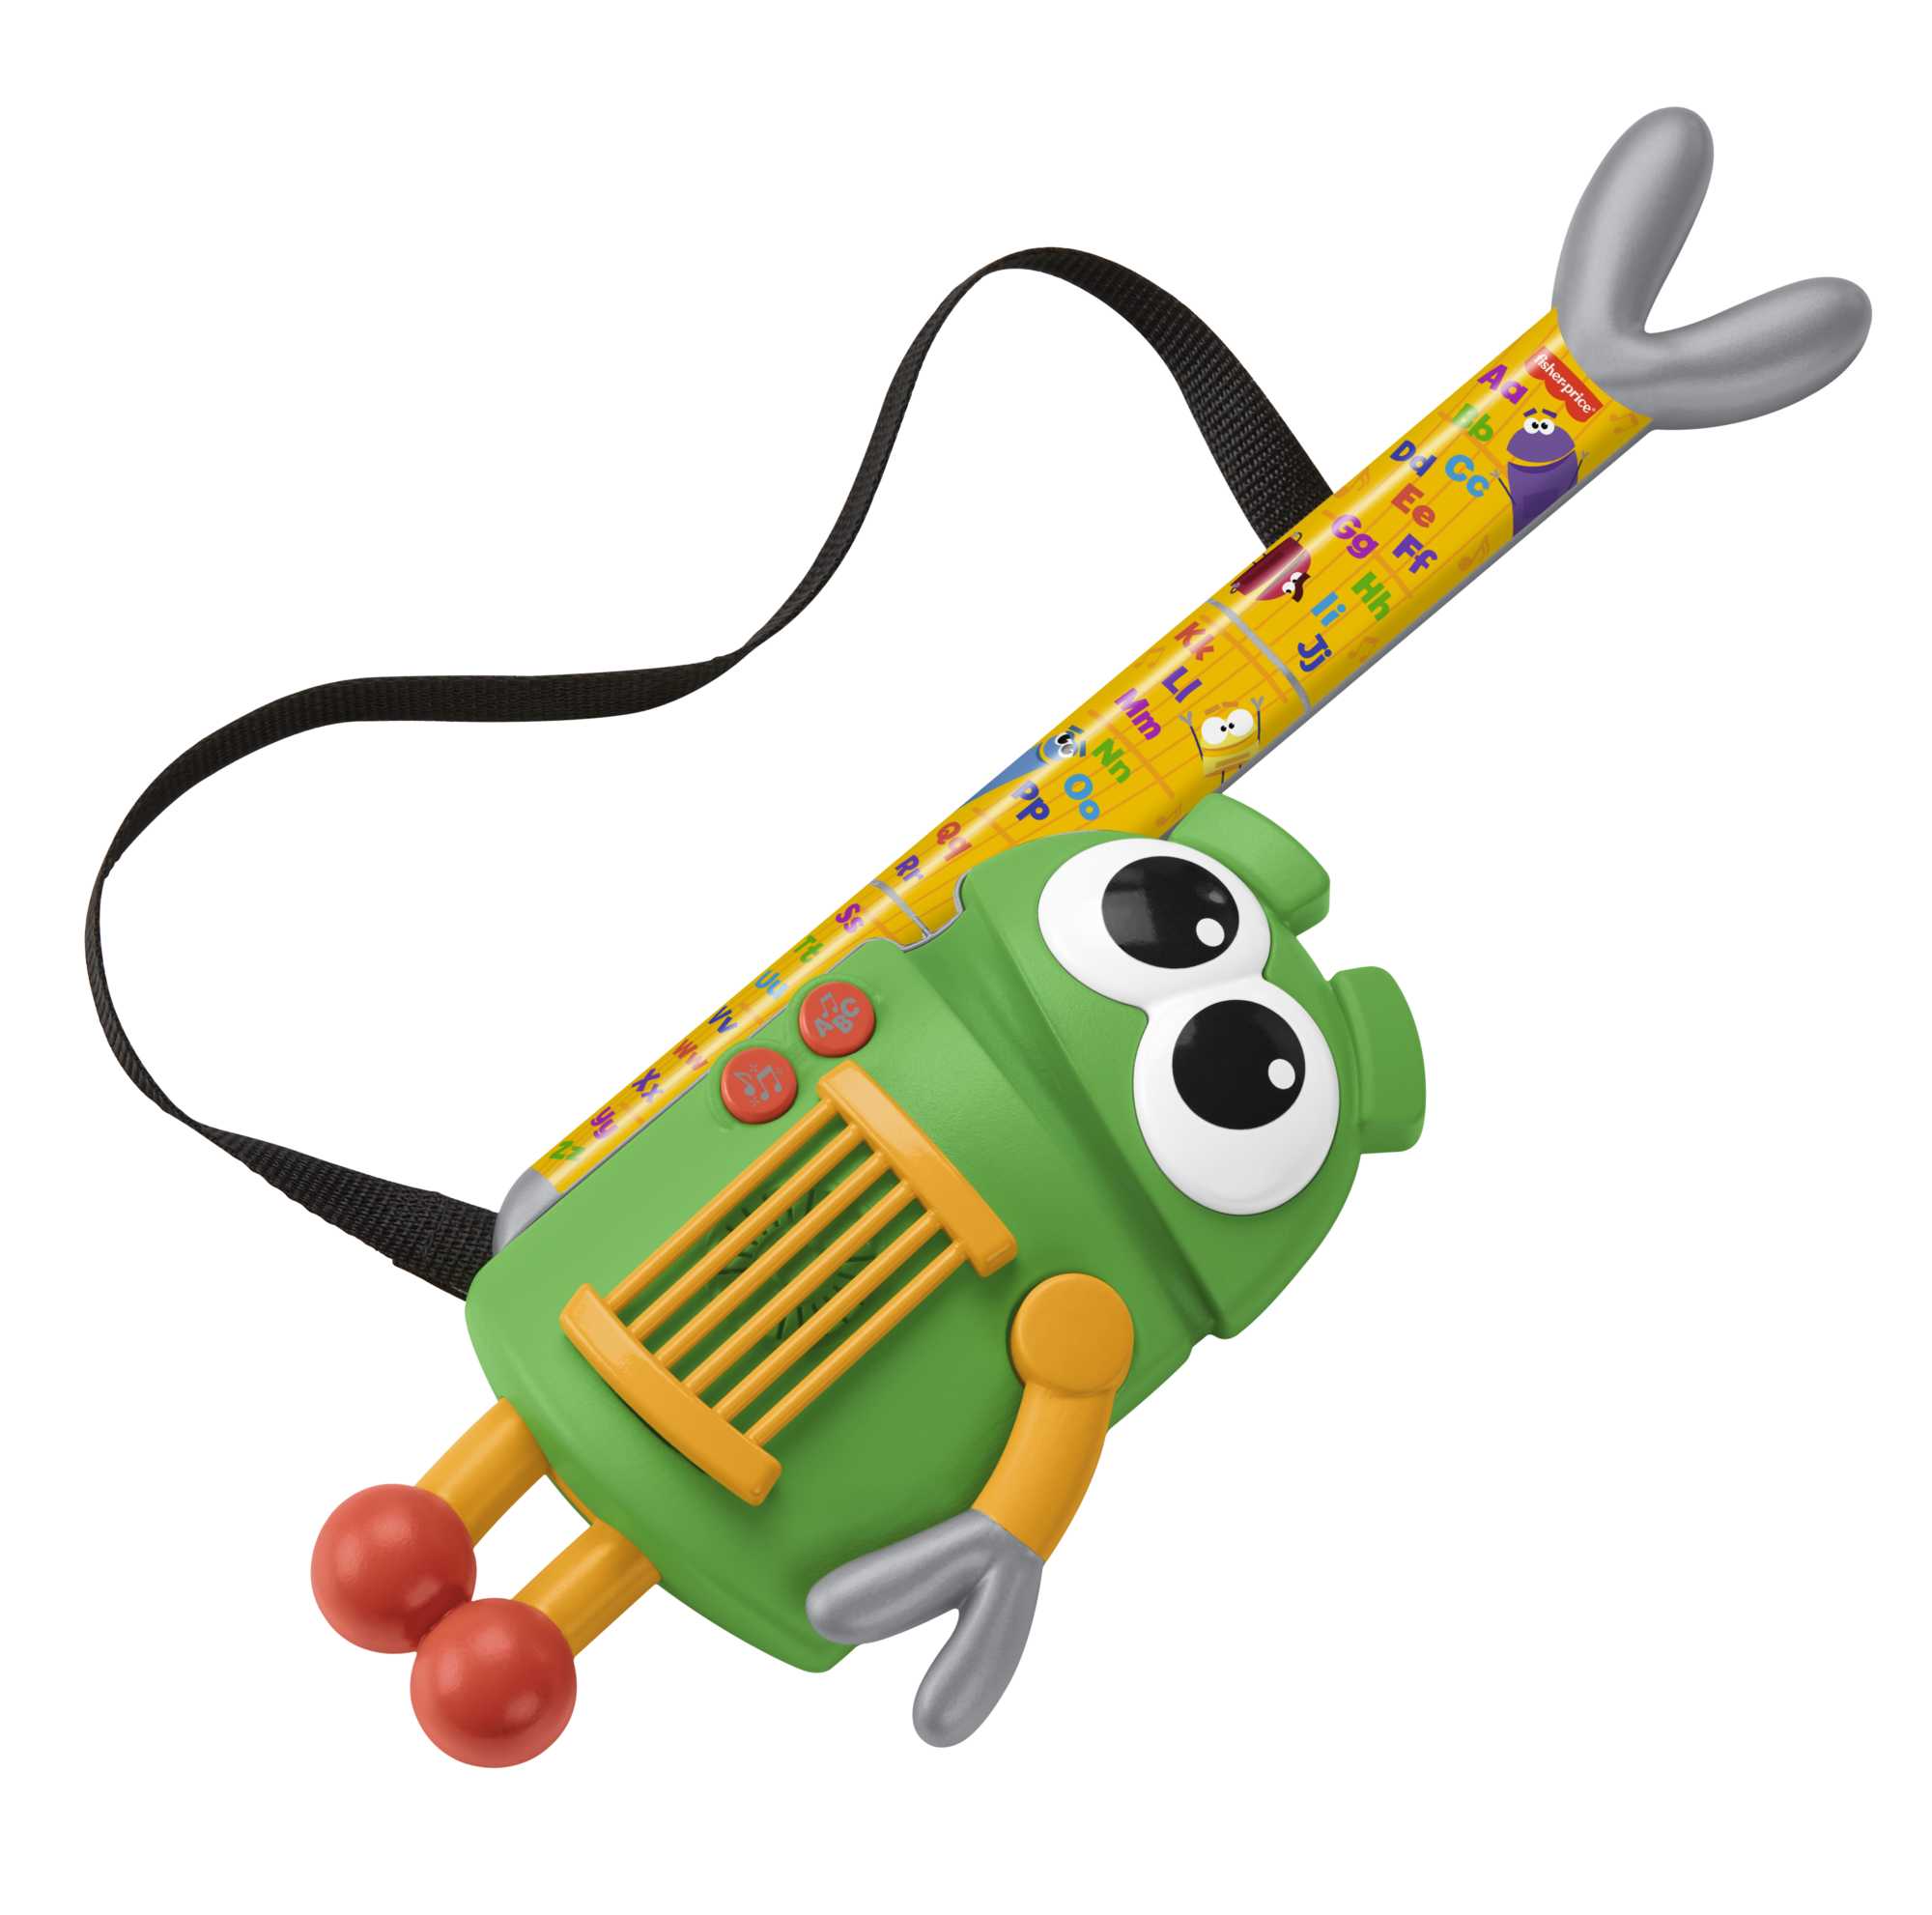 Fisher-Price StoryBots A to Z Rock Star Guitar Musical Learning Toy - image 1 of 7